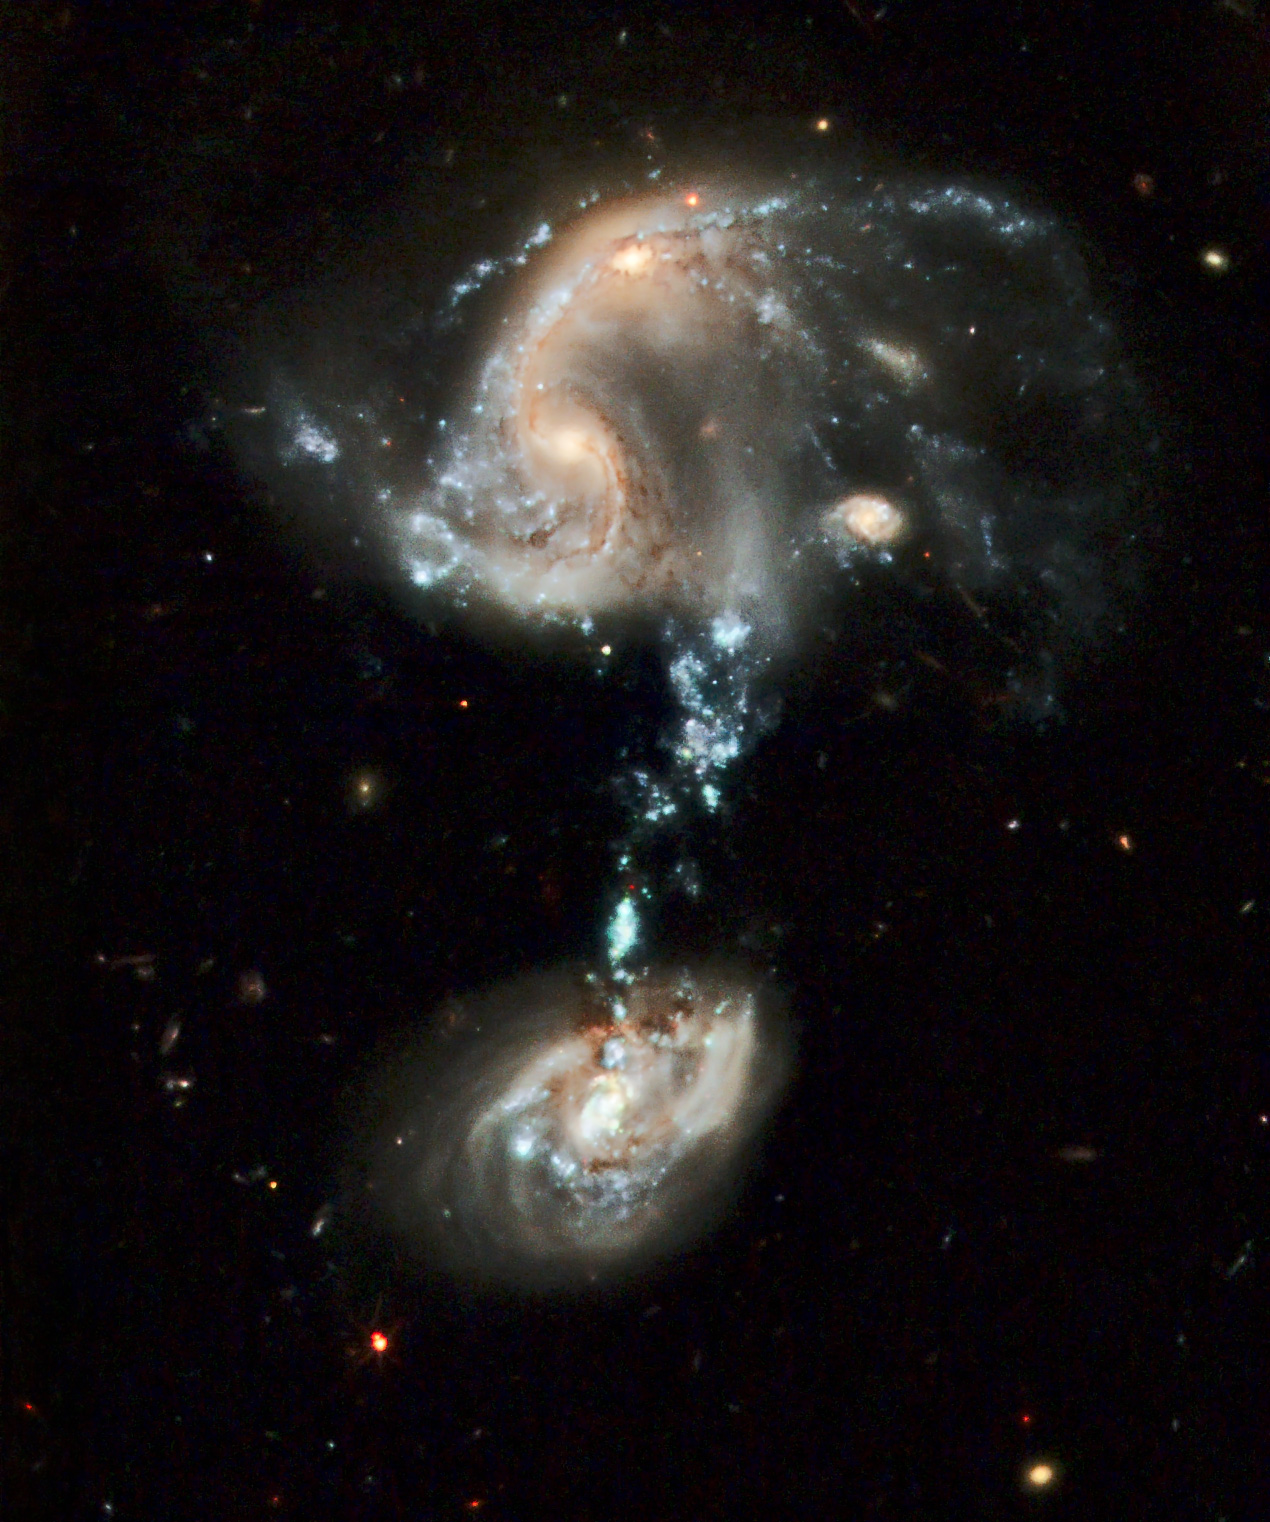 Arp 194 and its cosmic fountain; from ESA